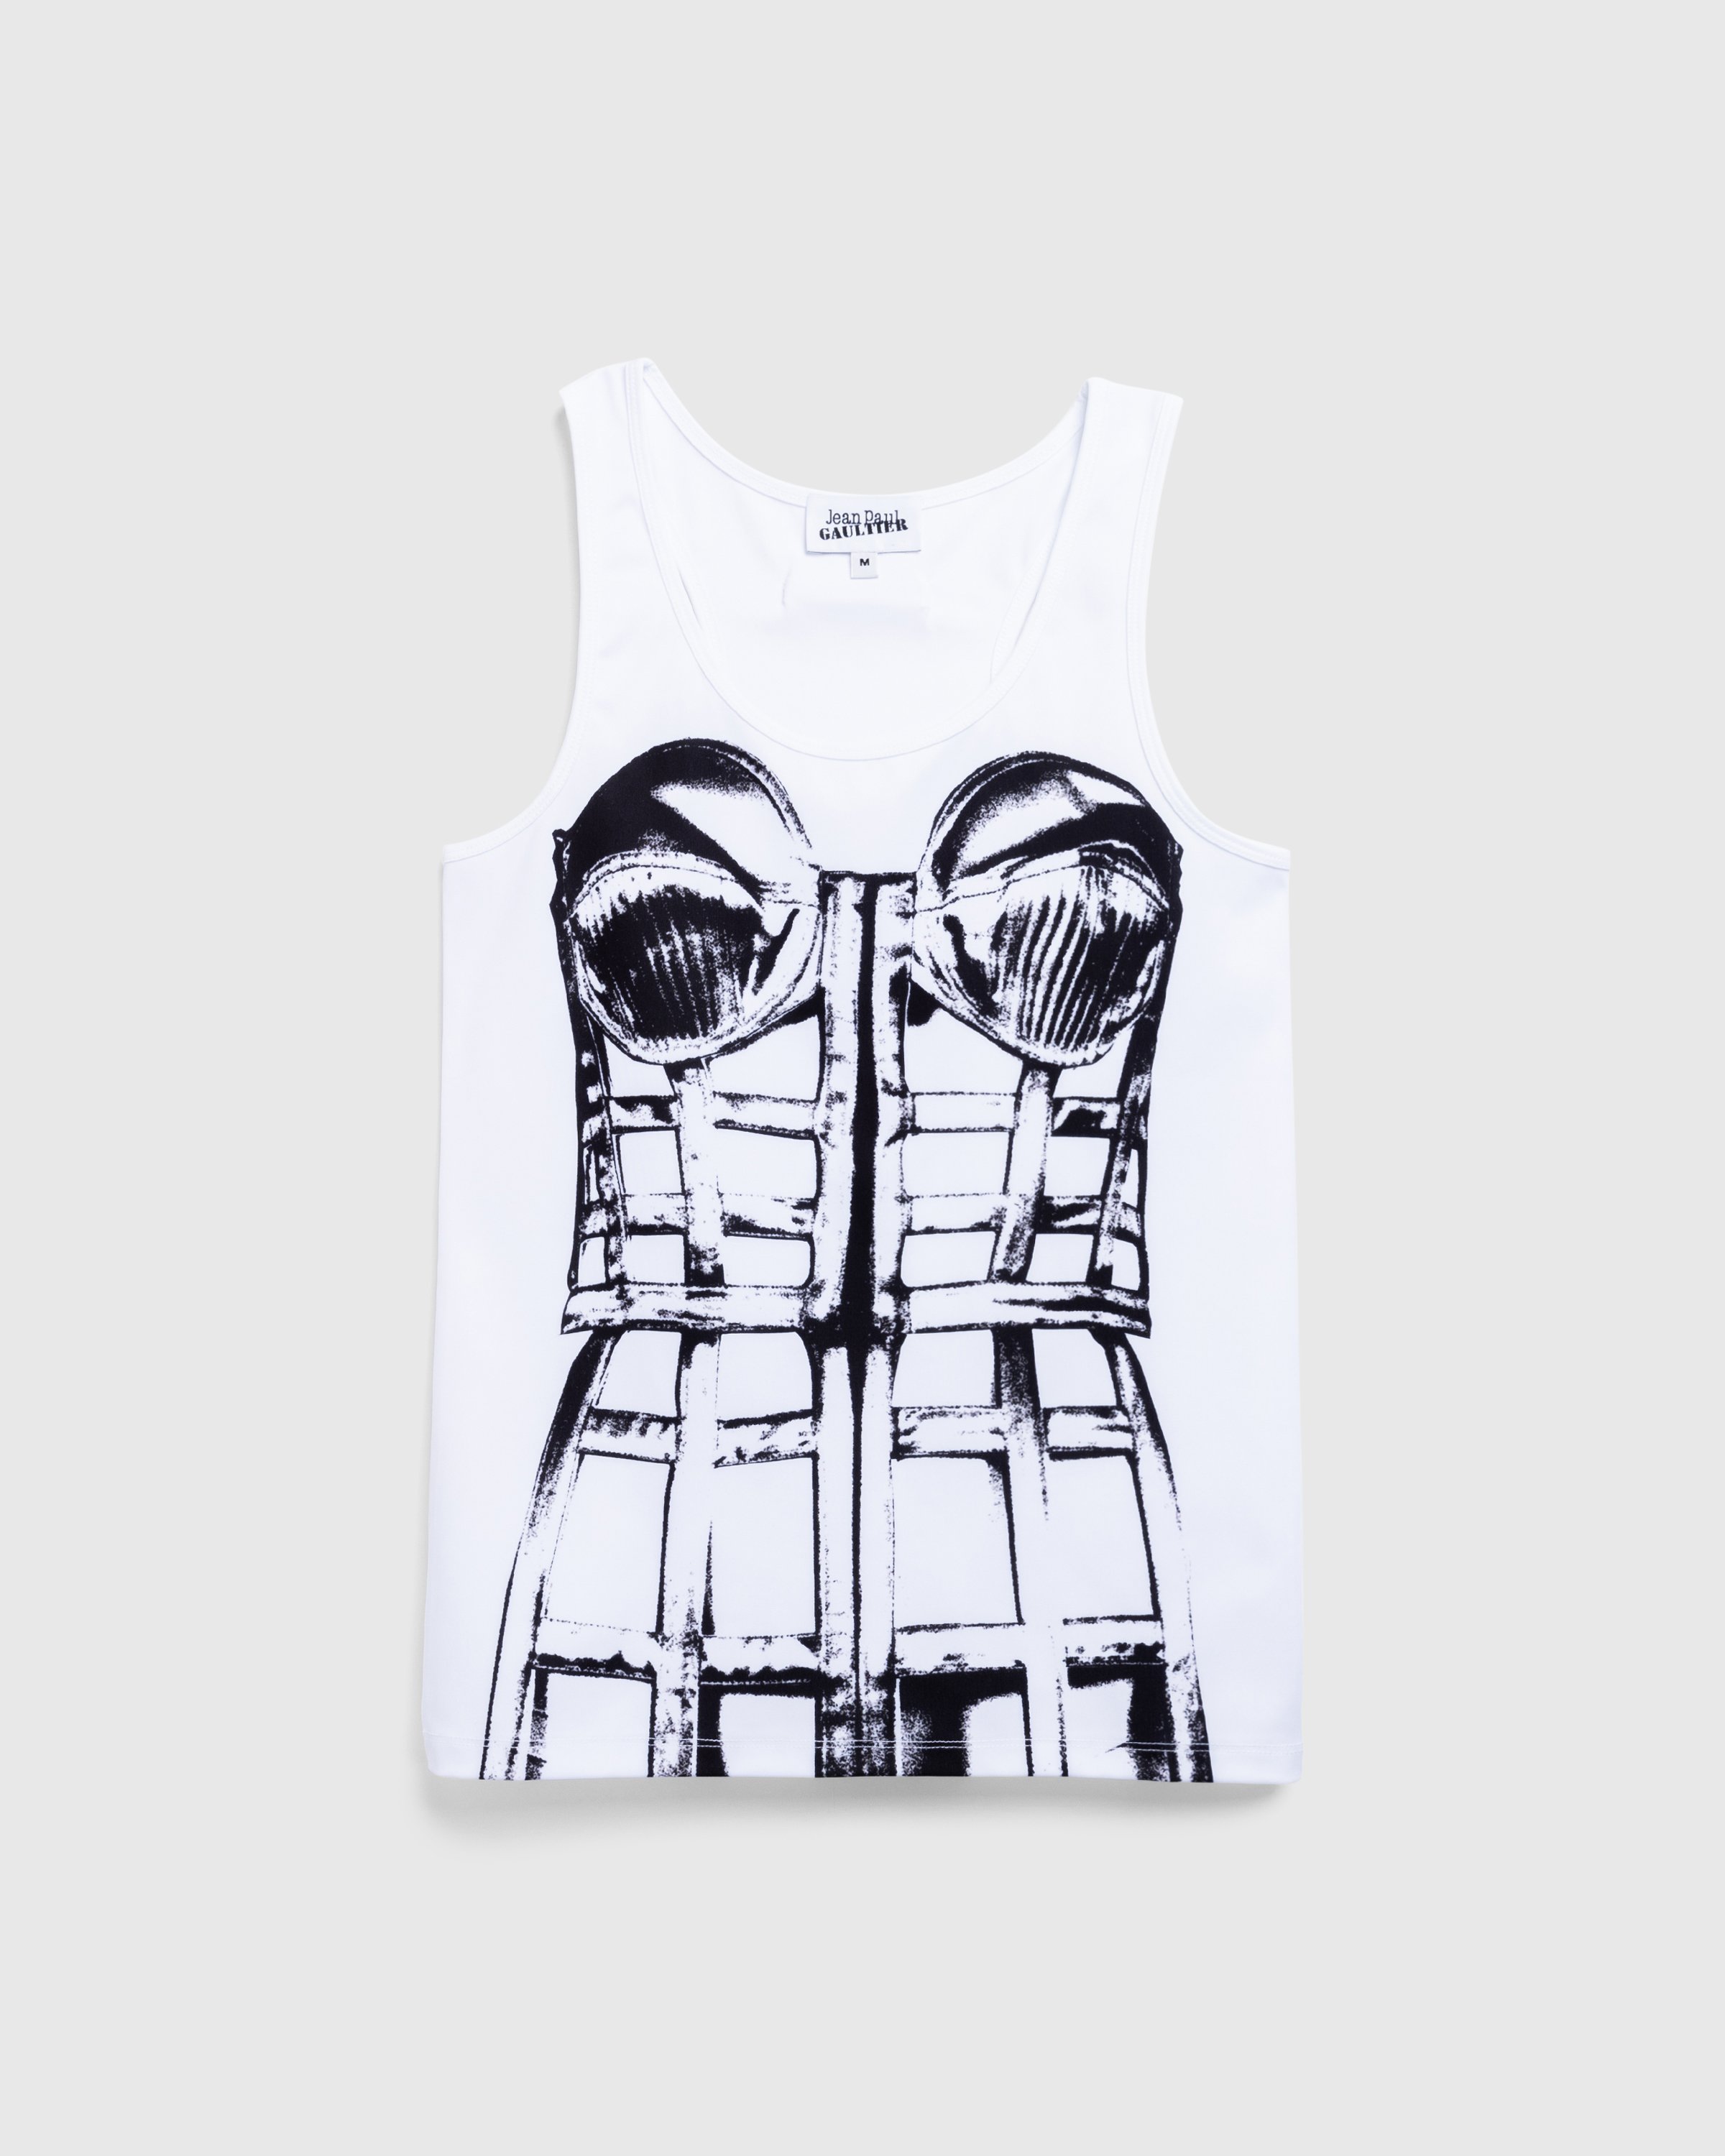 Jean Paul Gaultier - Jersey Top Printed "Cage Trompe L'Œil" White/Black - Clothing - White - Image 1